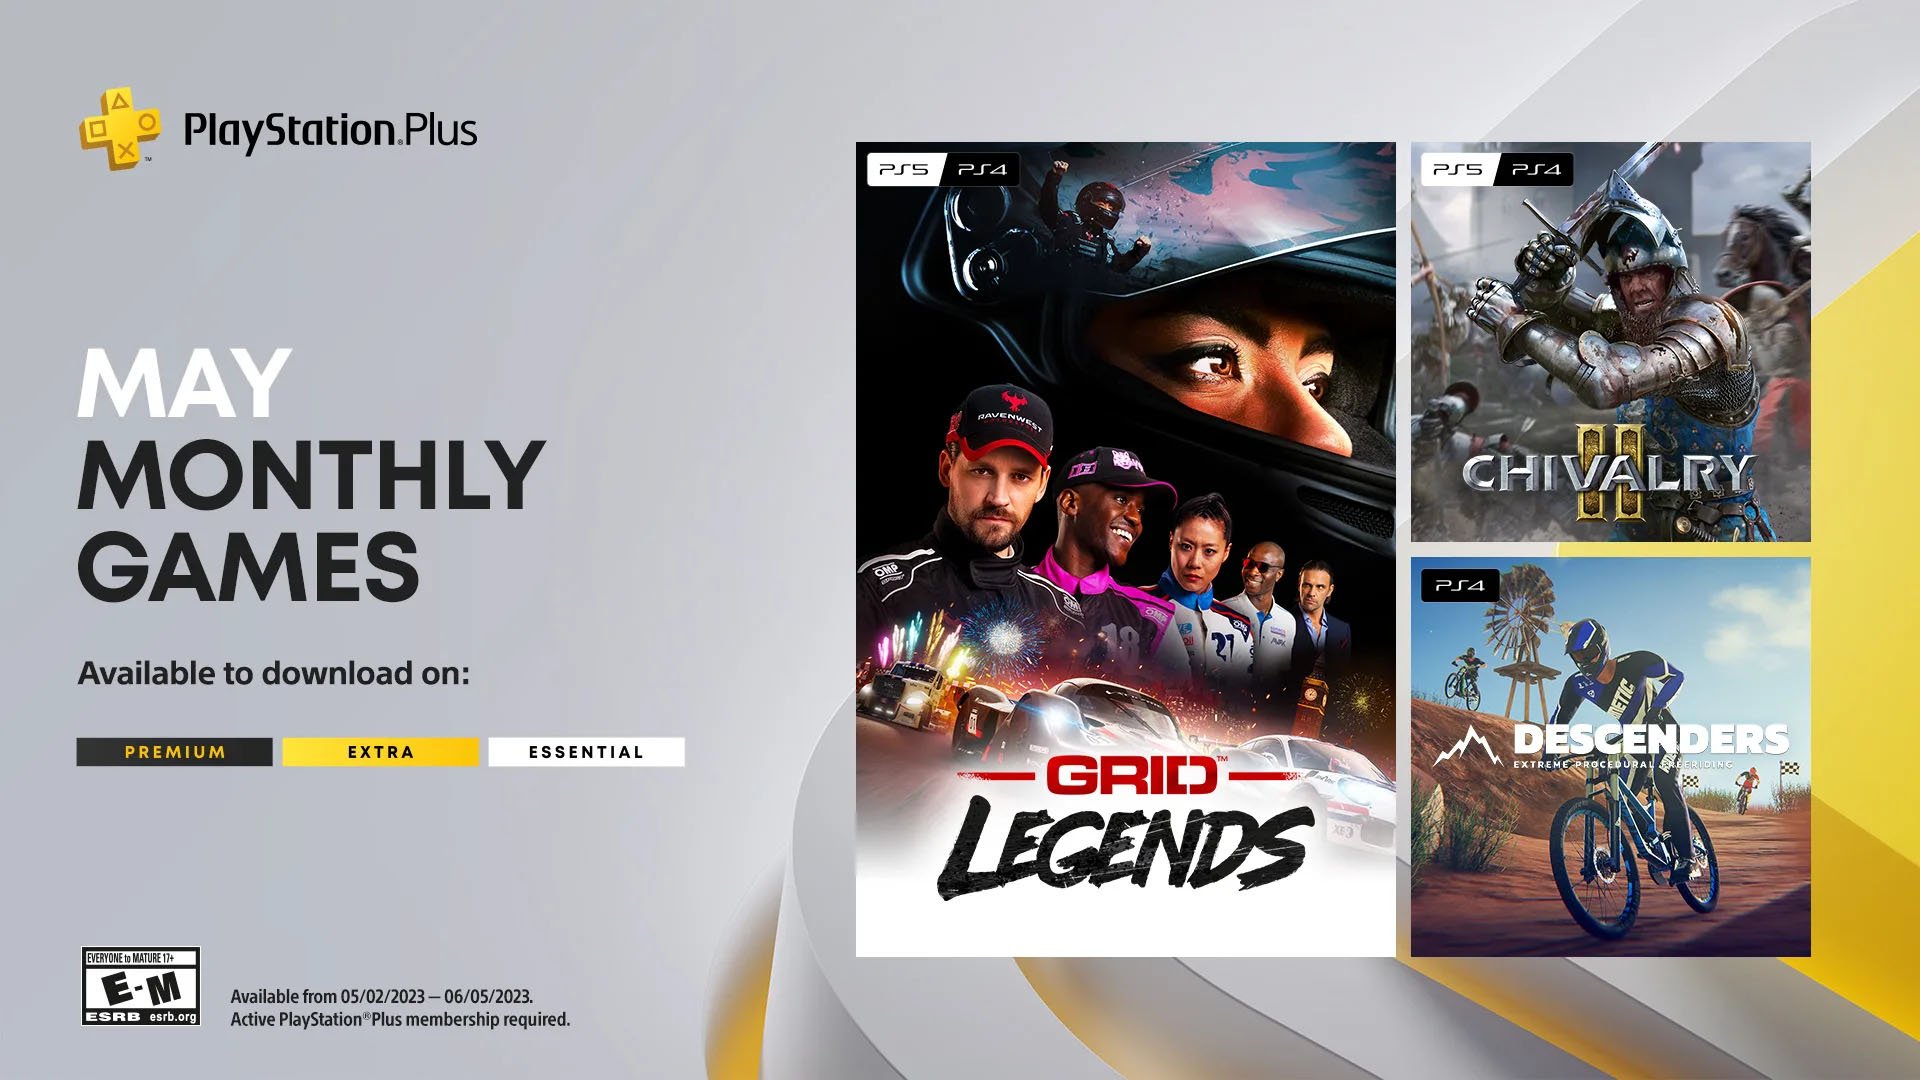 PlayStation Plus Free PS4 Games Lineup January 2016 